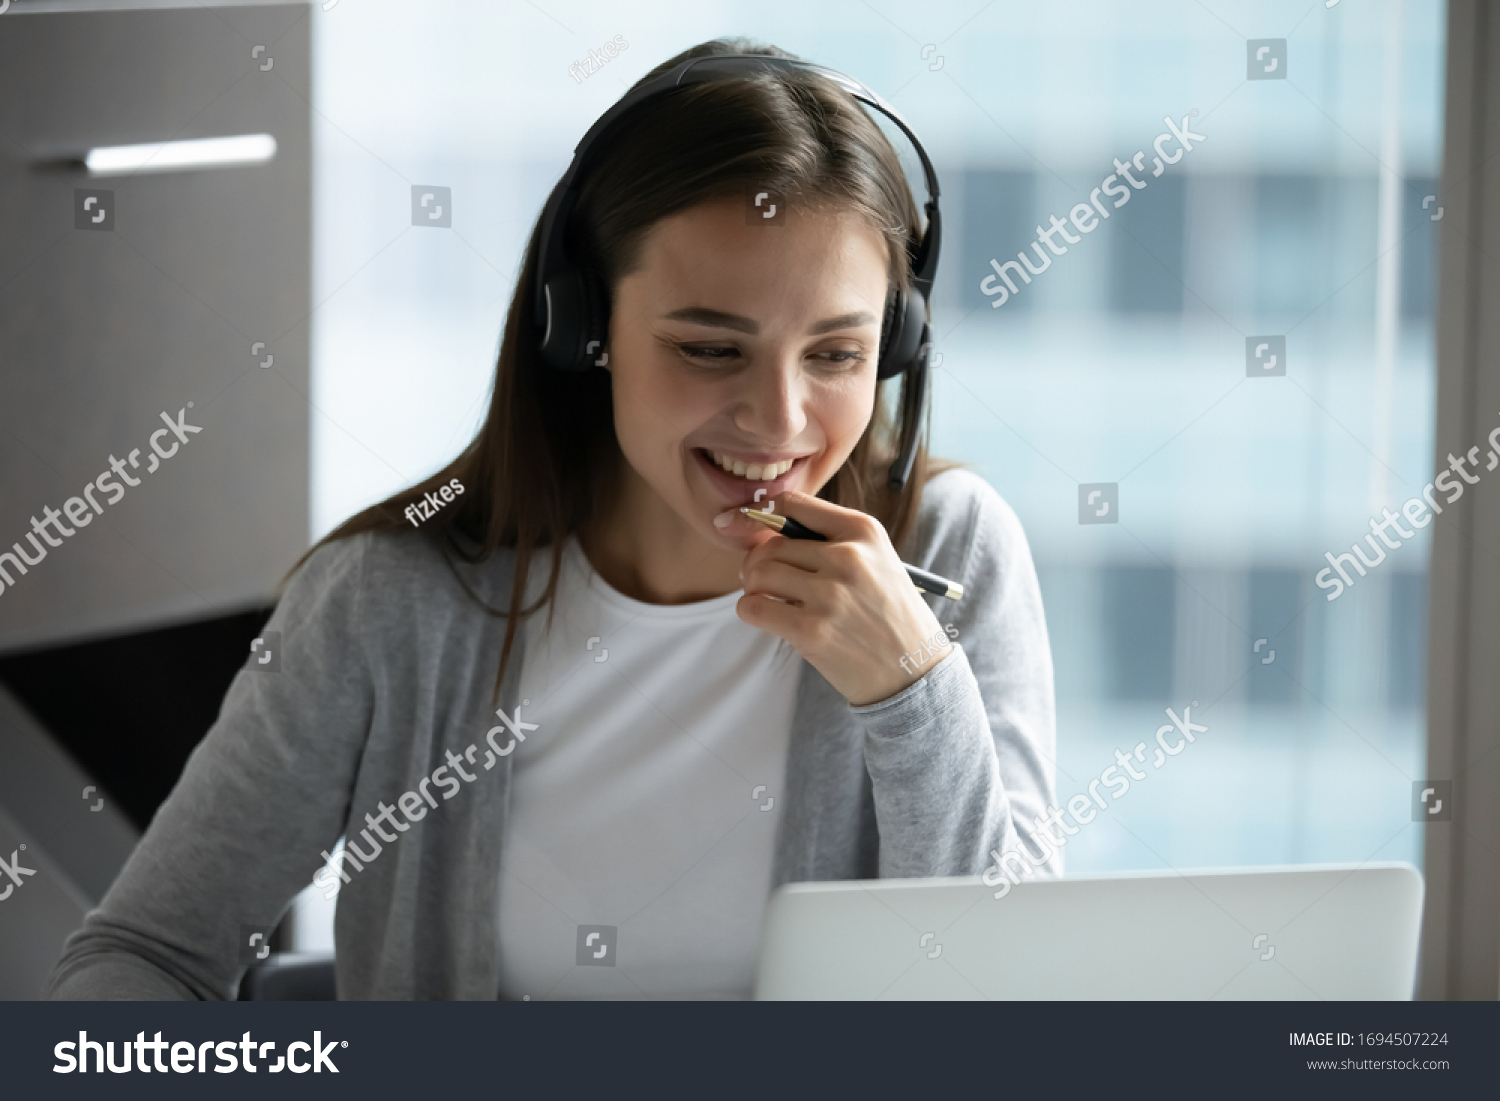 Happy millennial female in headphones watch webinar on laptop in modern office, smiling young businesswoman have fun laugh talk on video call with client or colleague use wireless Internet connection #1694507224